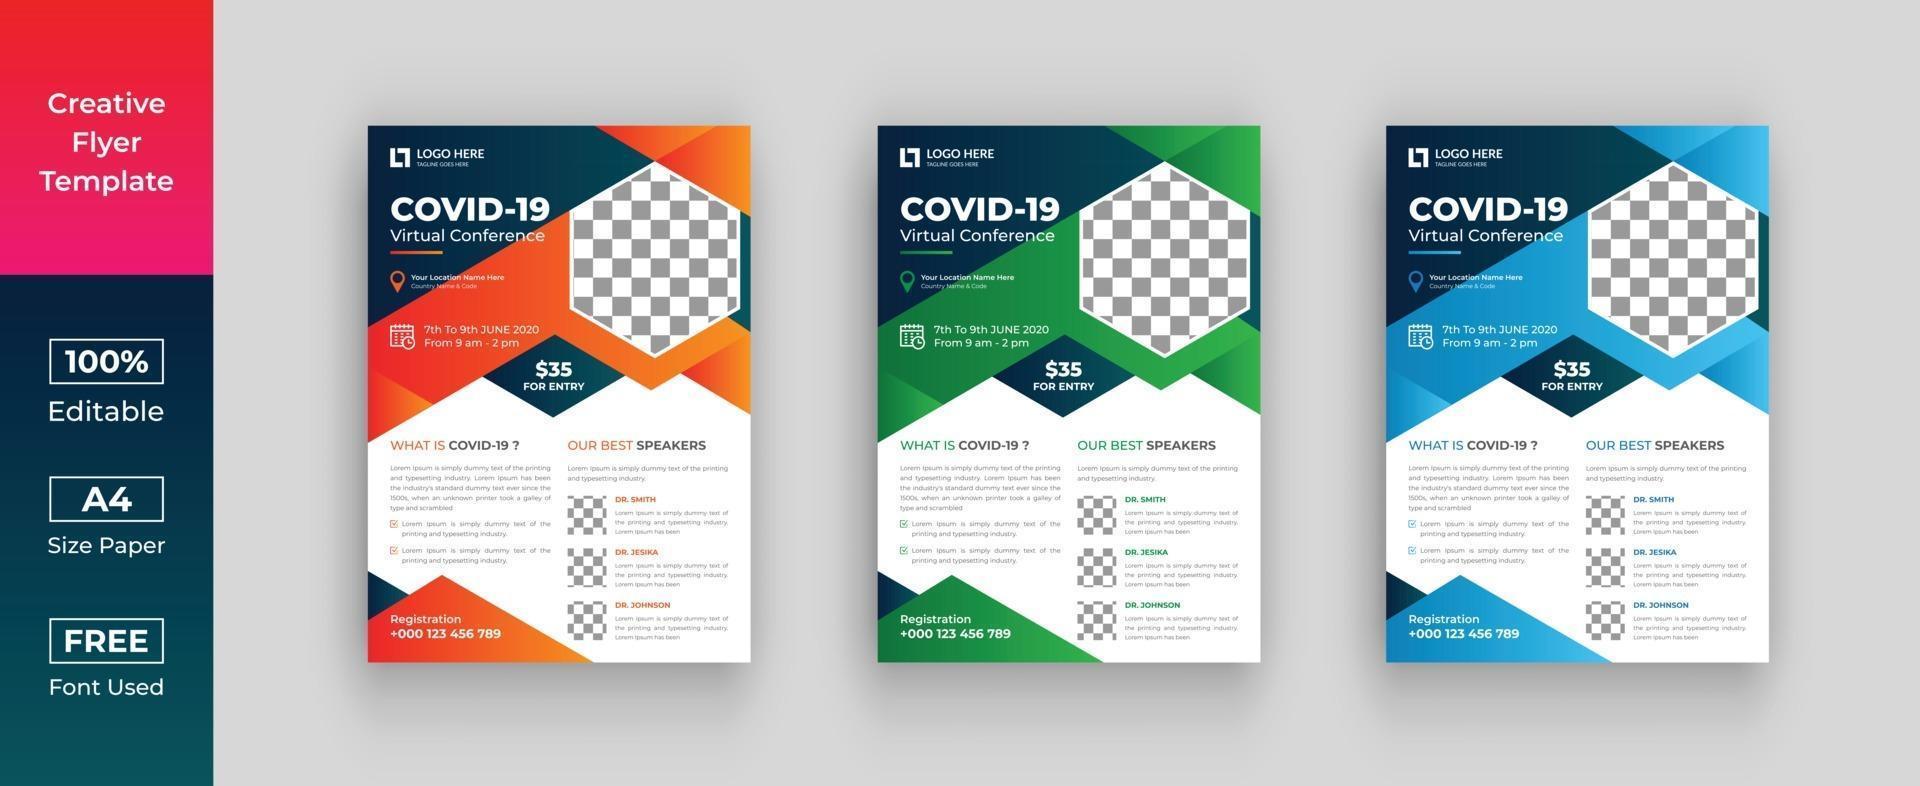 Covid-19 conference flyer template, Covid-19 flyer or poster vector